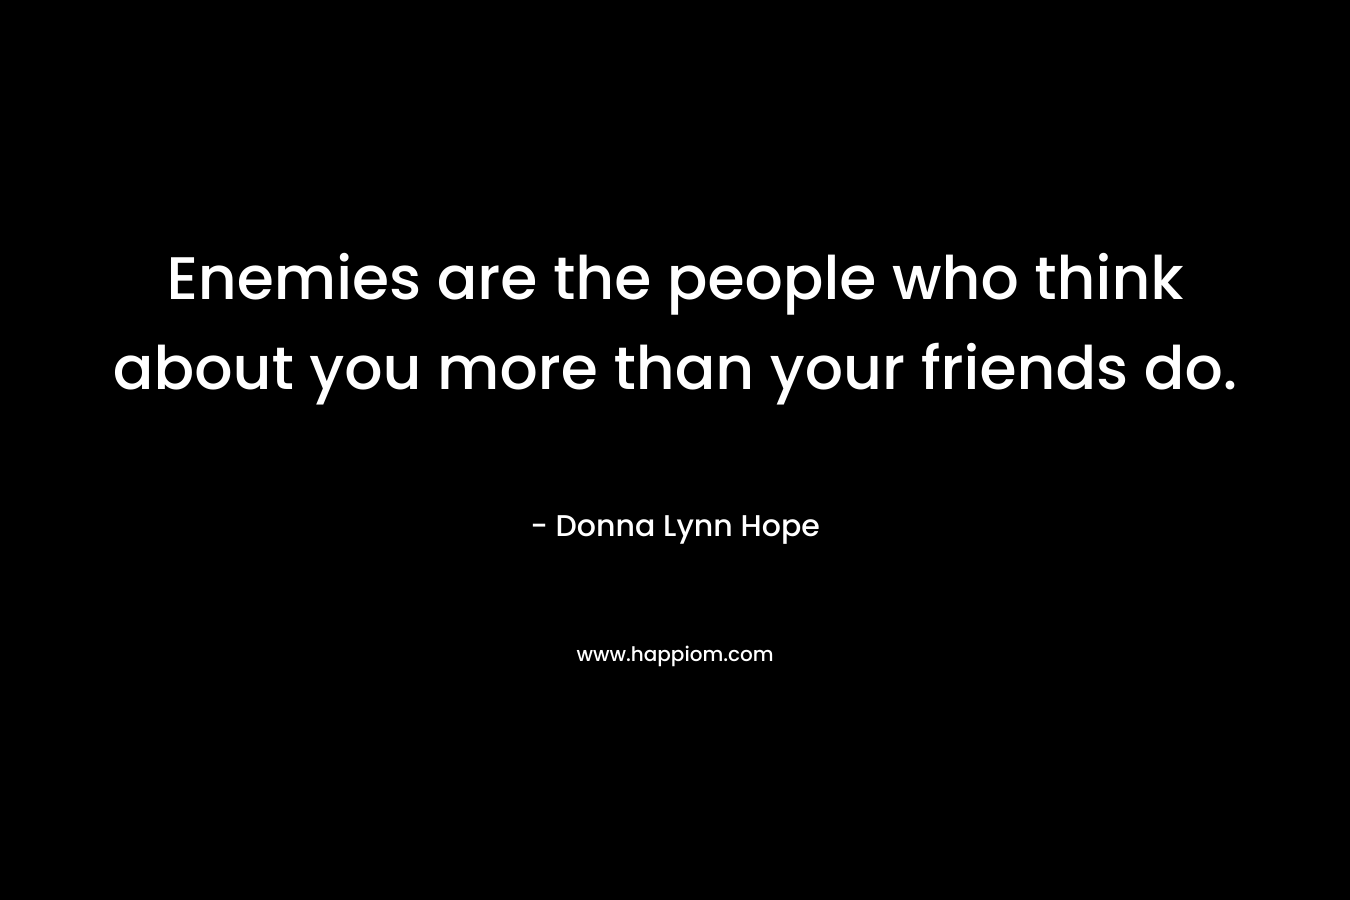 Enemies are the people who think about you more than your friends do.